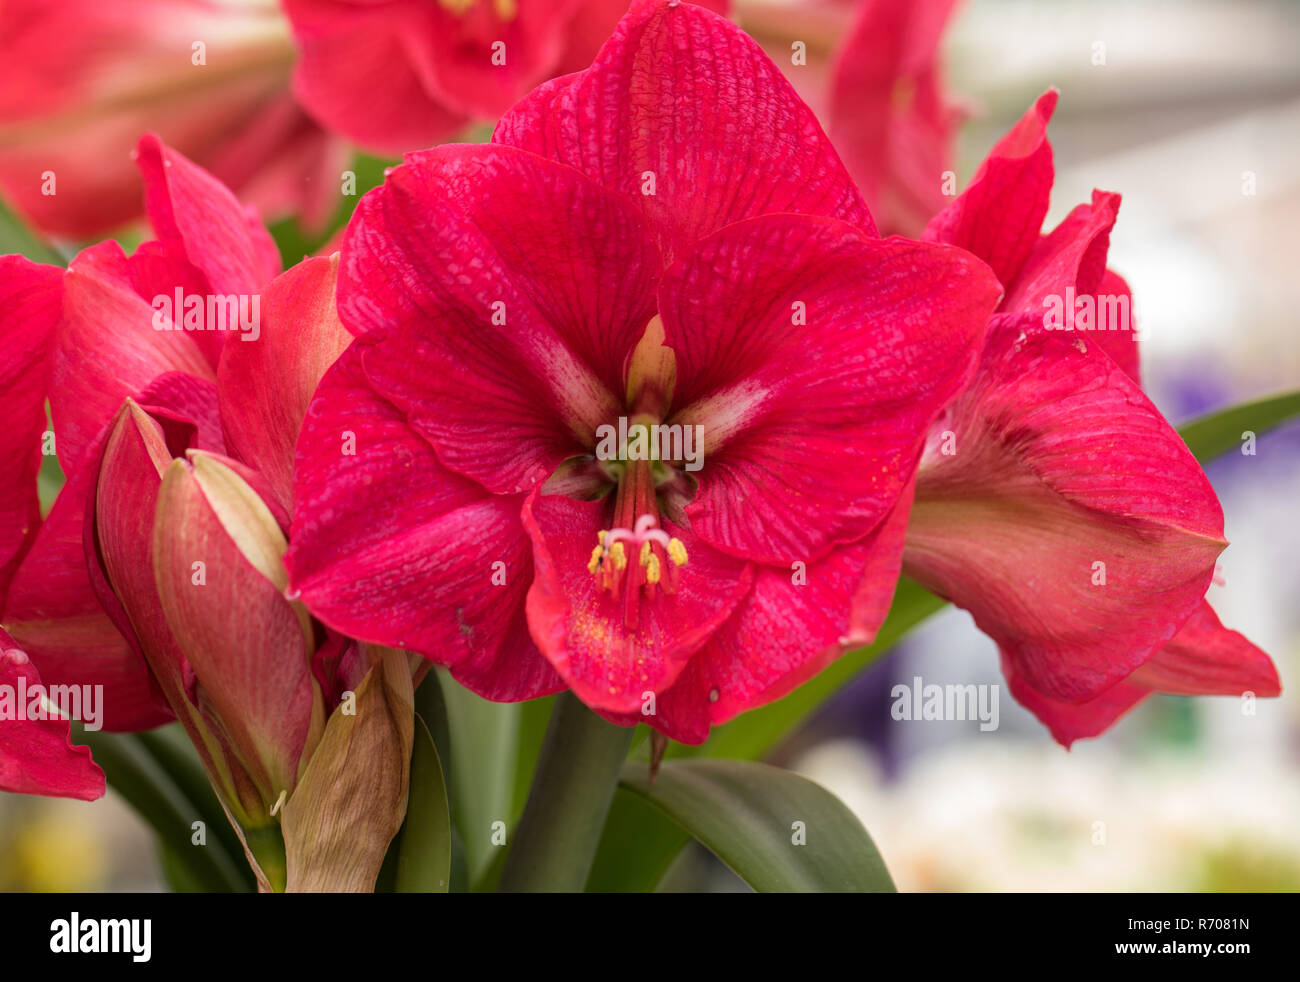 red  amaryllis flower blooming in a natural garden Stock Photo